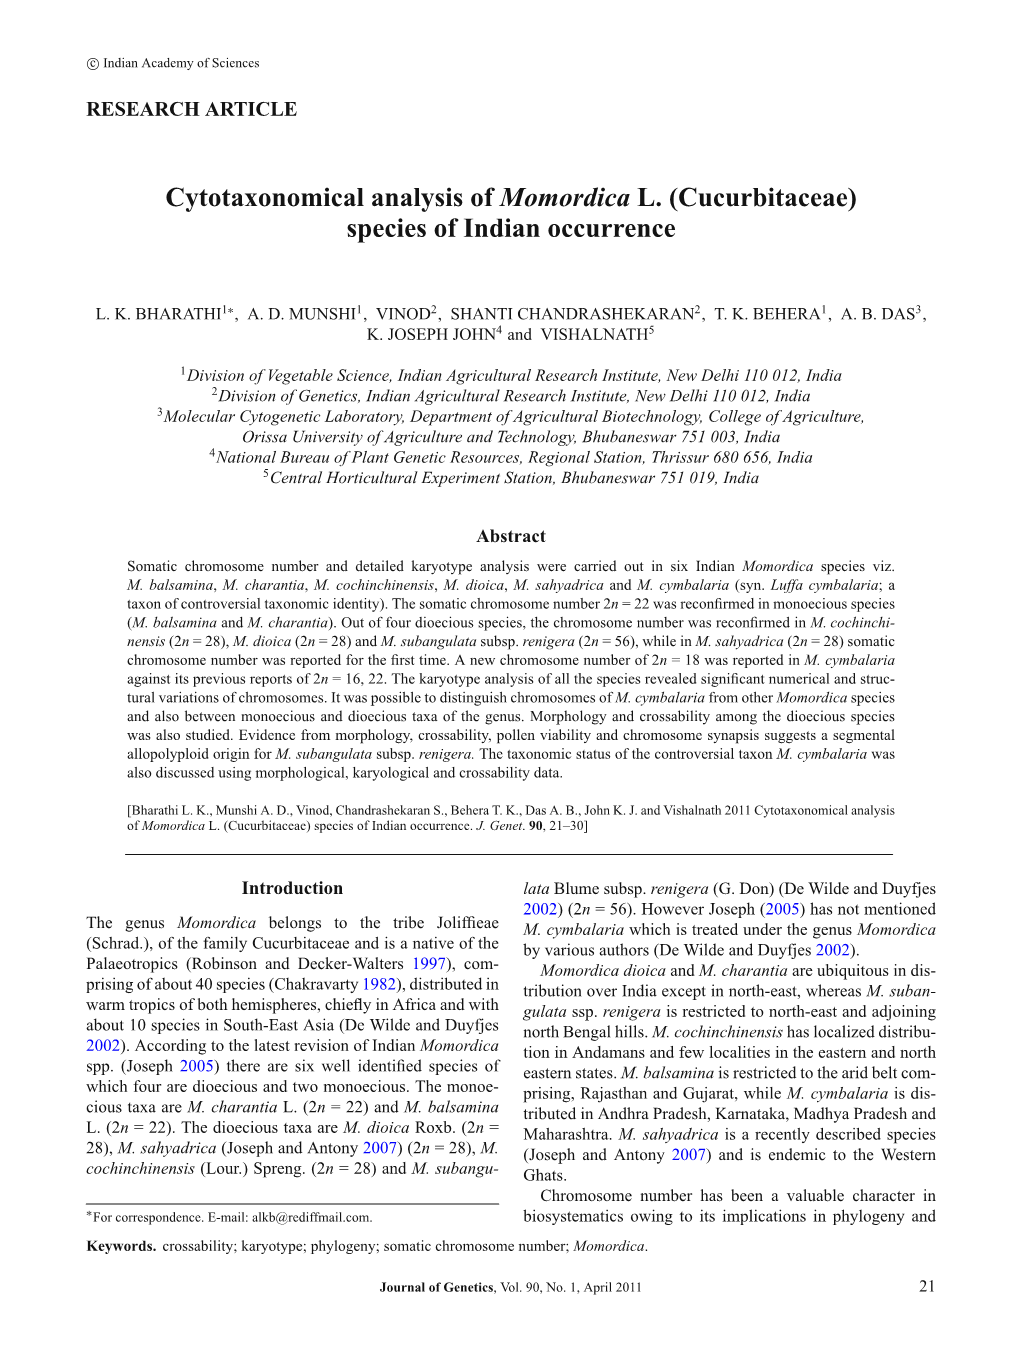 Cytotaxonomical Analysis of Momordica L. (Cucurbitaceae) Species of Indian Occurrence